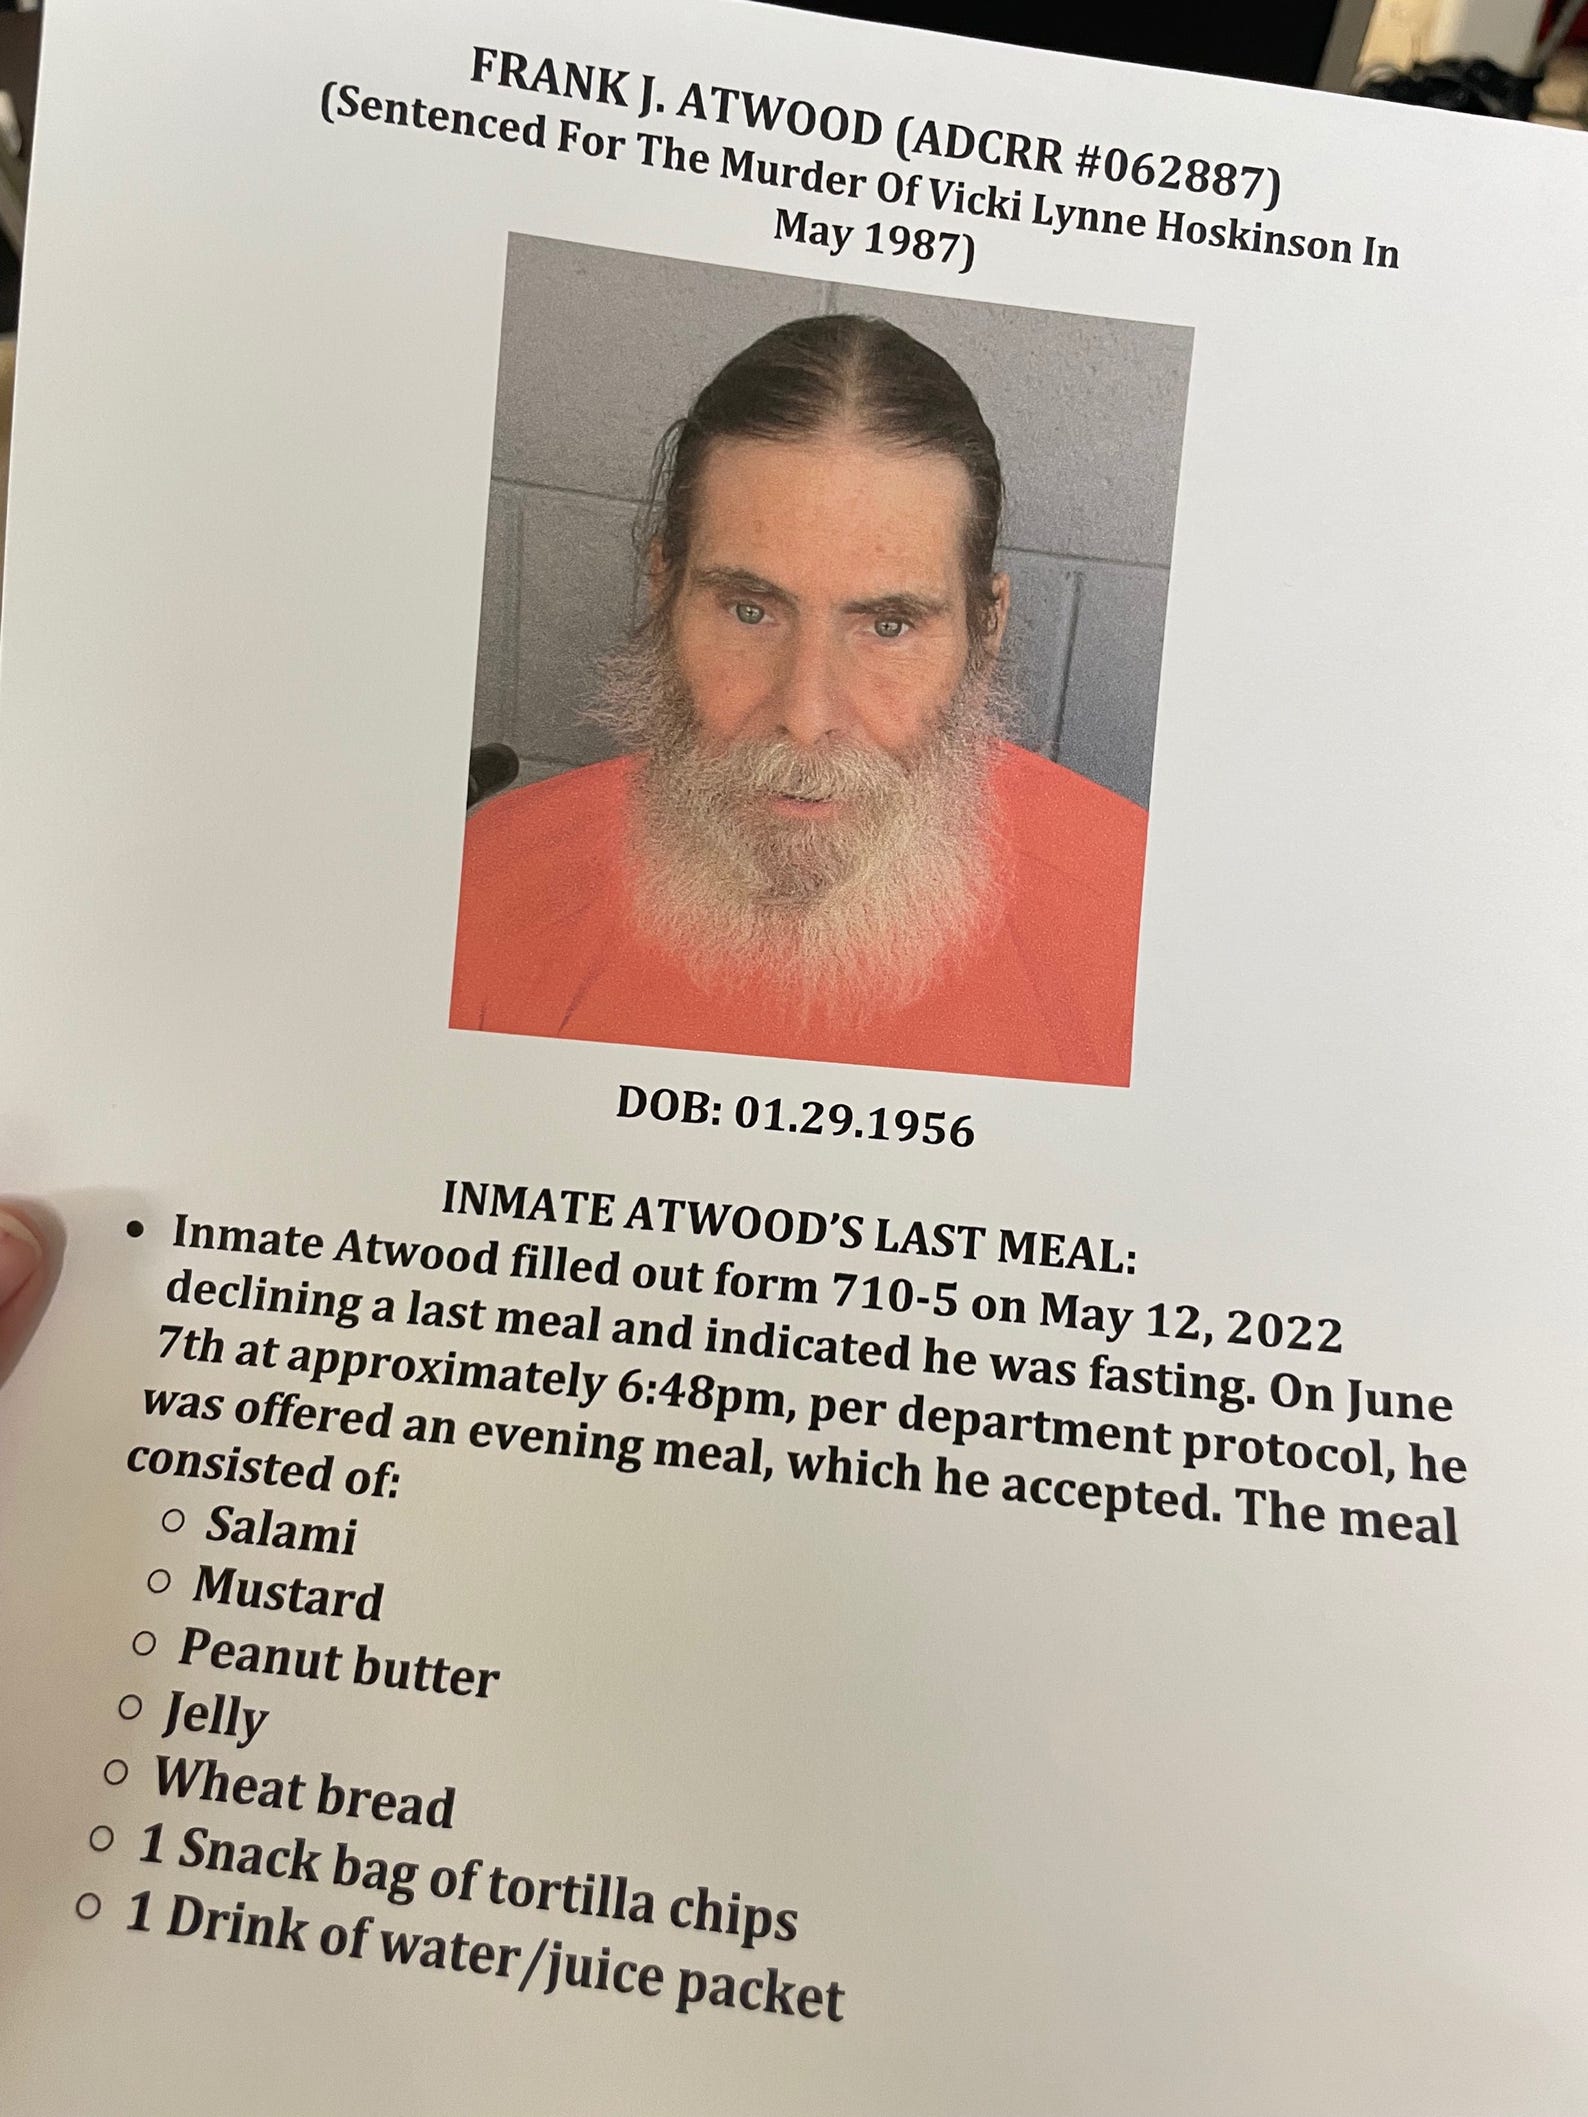 Frank Atwood in May filled out a form declining a last meal and indicated he was fasting, according to documents provided to press at the Arizona State Prison in Florence. But at about 6:48 p.m. on June 7, he was offered a meal and accepted.